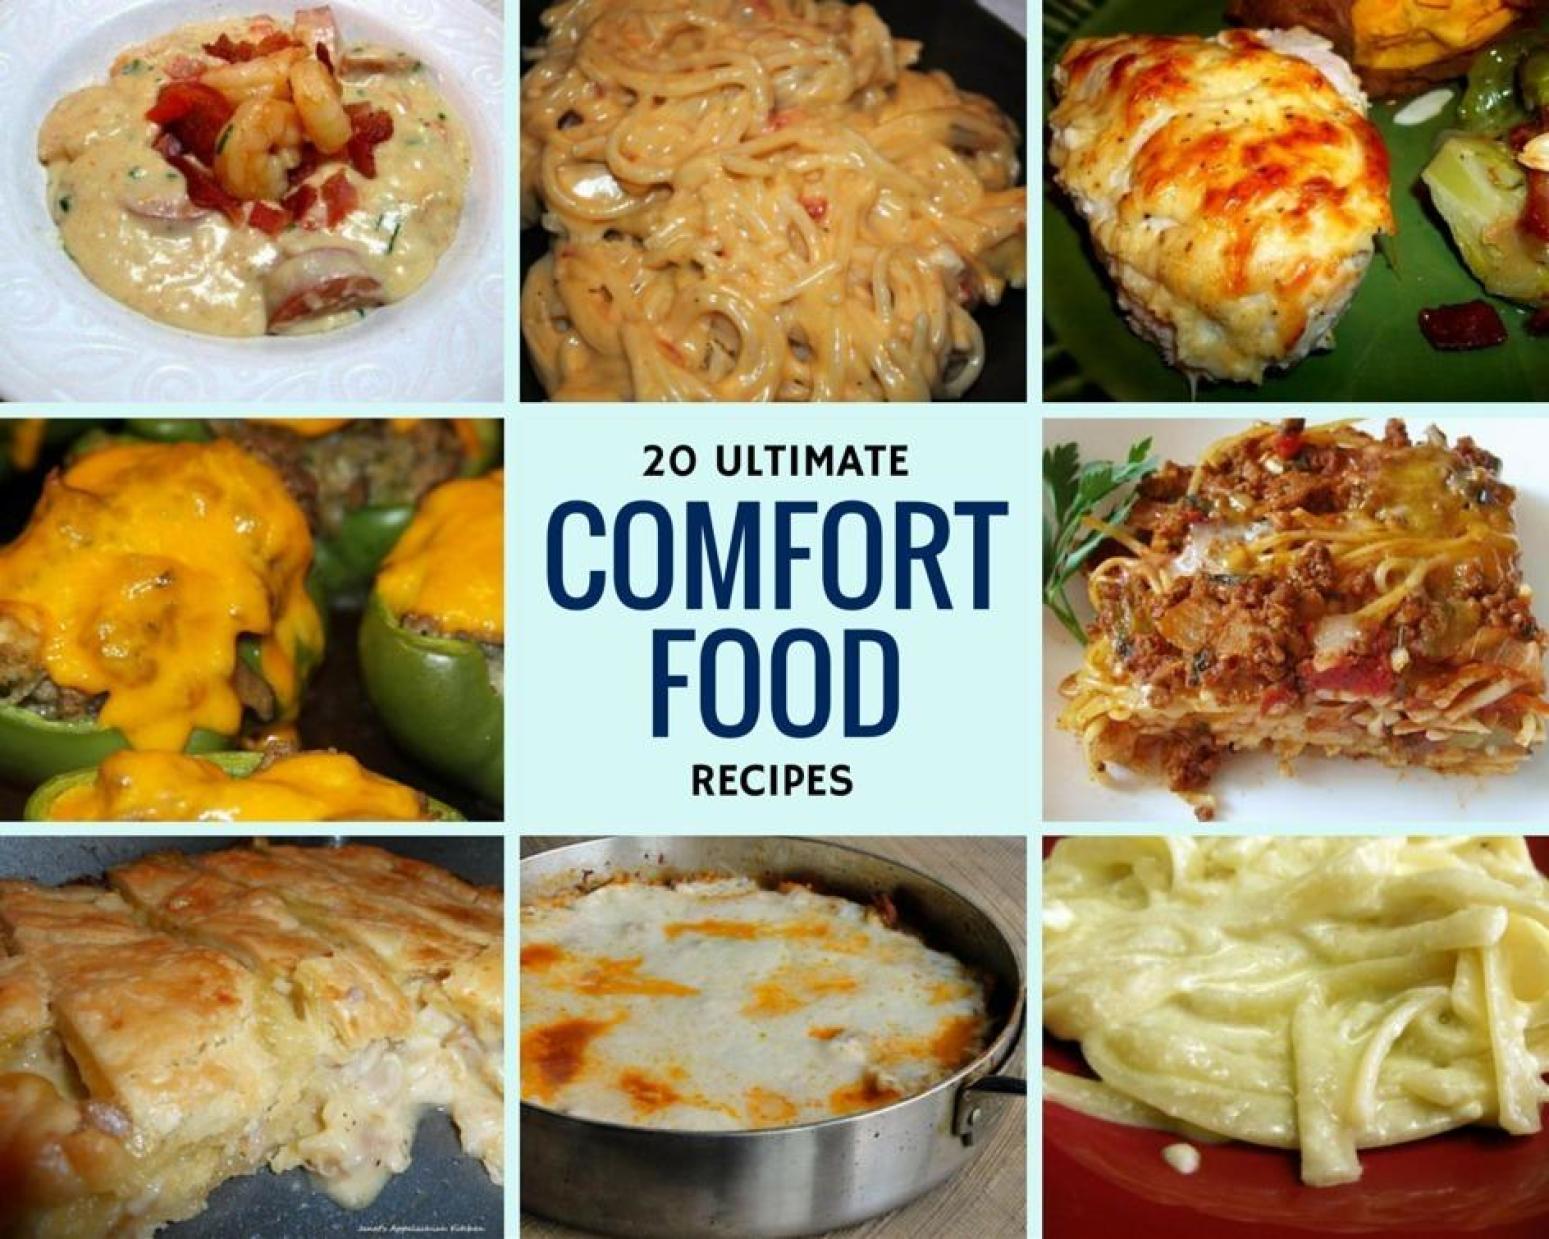 Can any food be a comfort food?